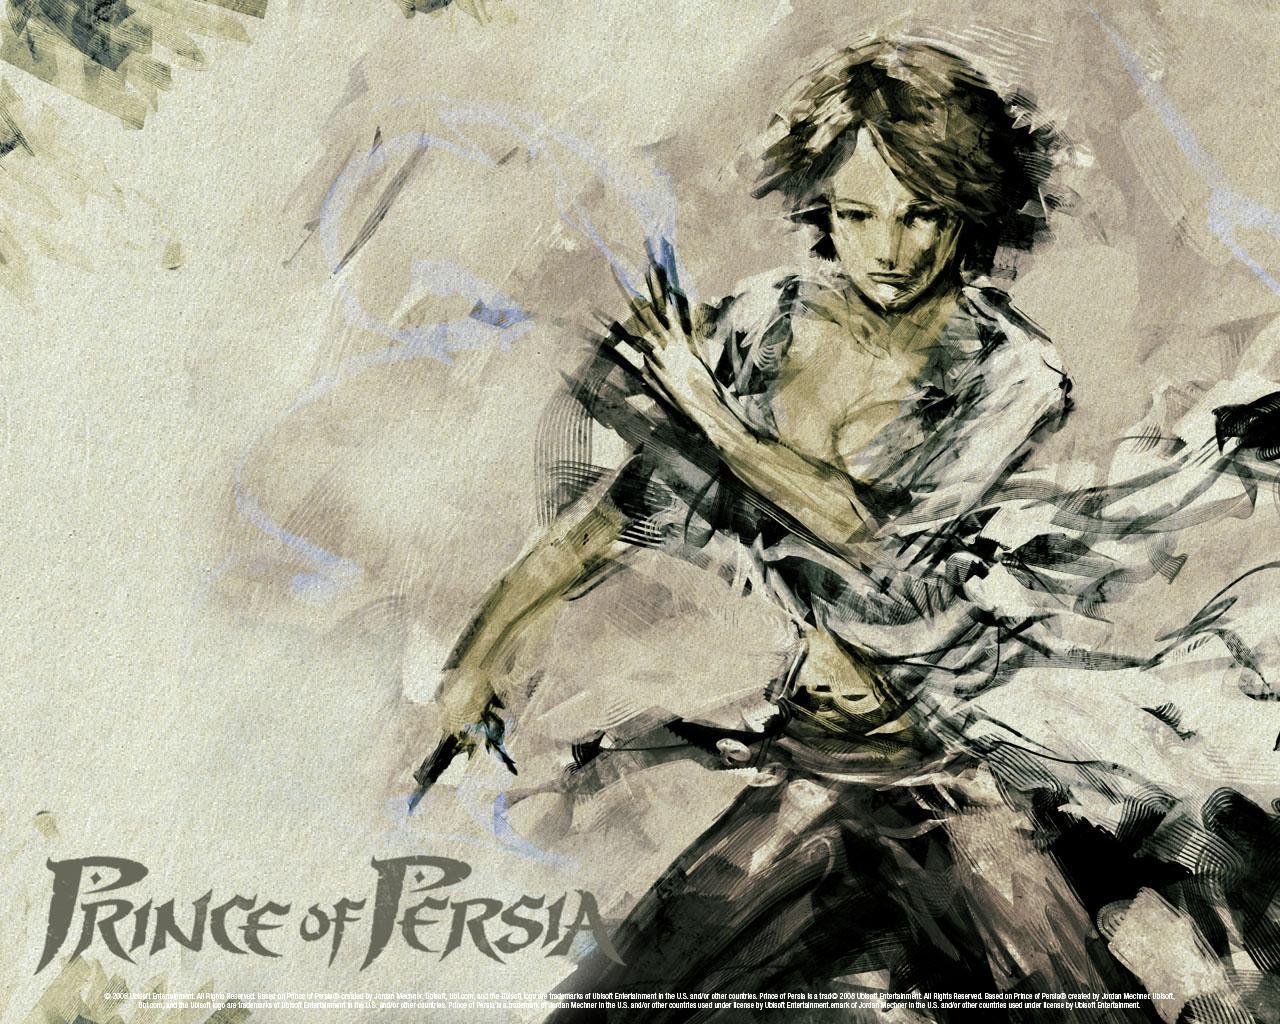 Prince of Persia (2008) for the game (wallpaper)